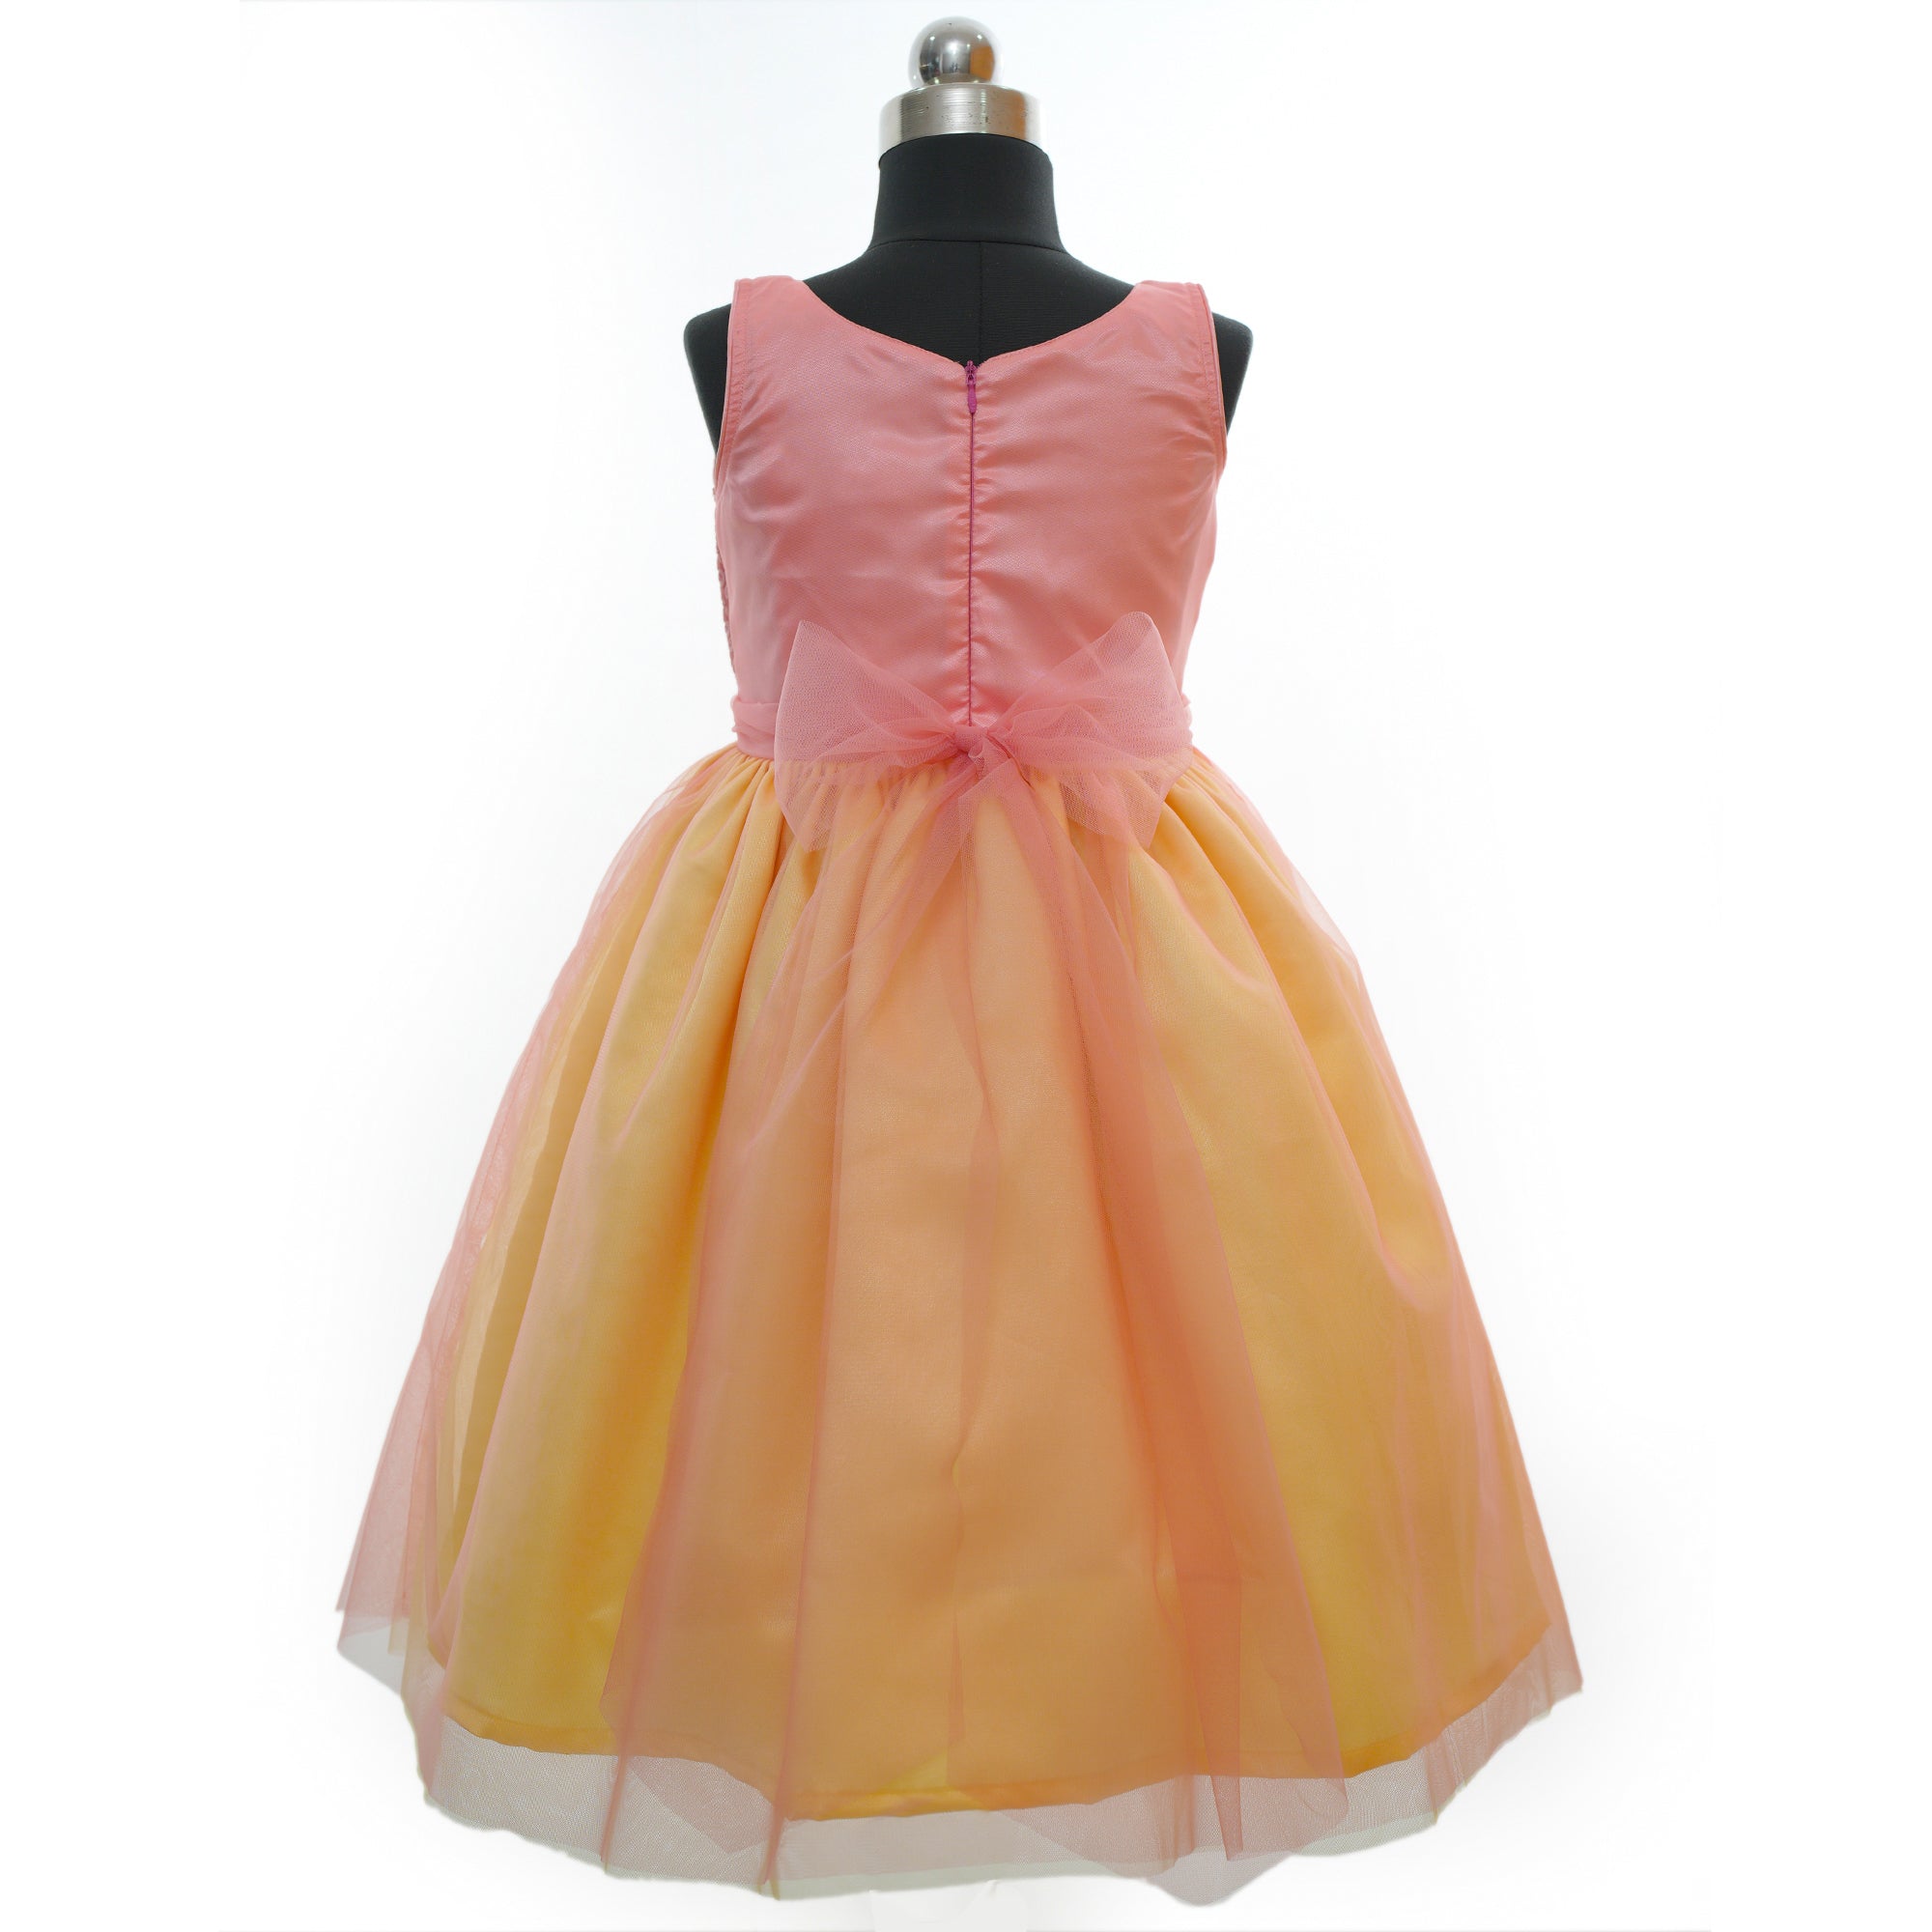 Yellow 3D Floral Applique Ball Gown Flower Tutu Dress With Beaded Puffy Cap  Sleeves Perfect For Pageants, Parties, And Celerity Events From Dresstop,  $107.89 | DHgate.Com